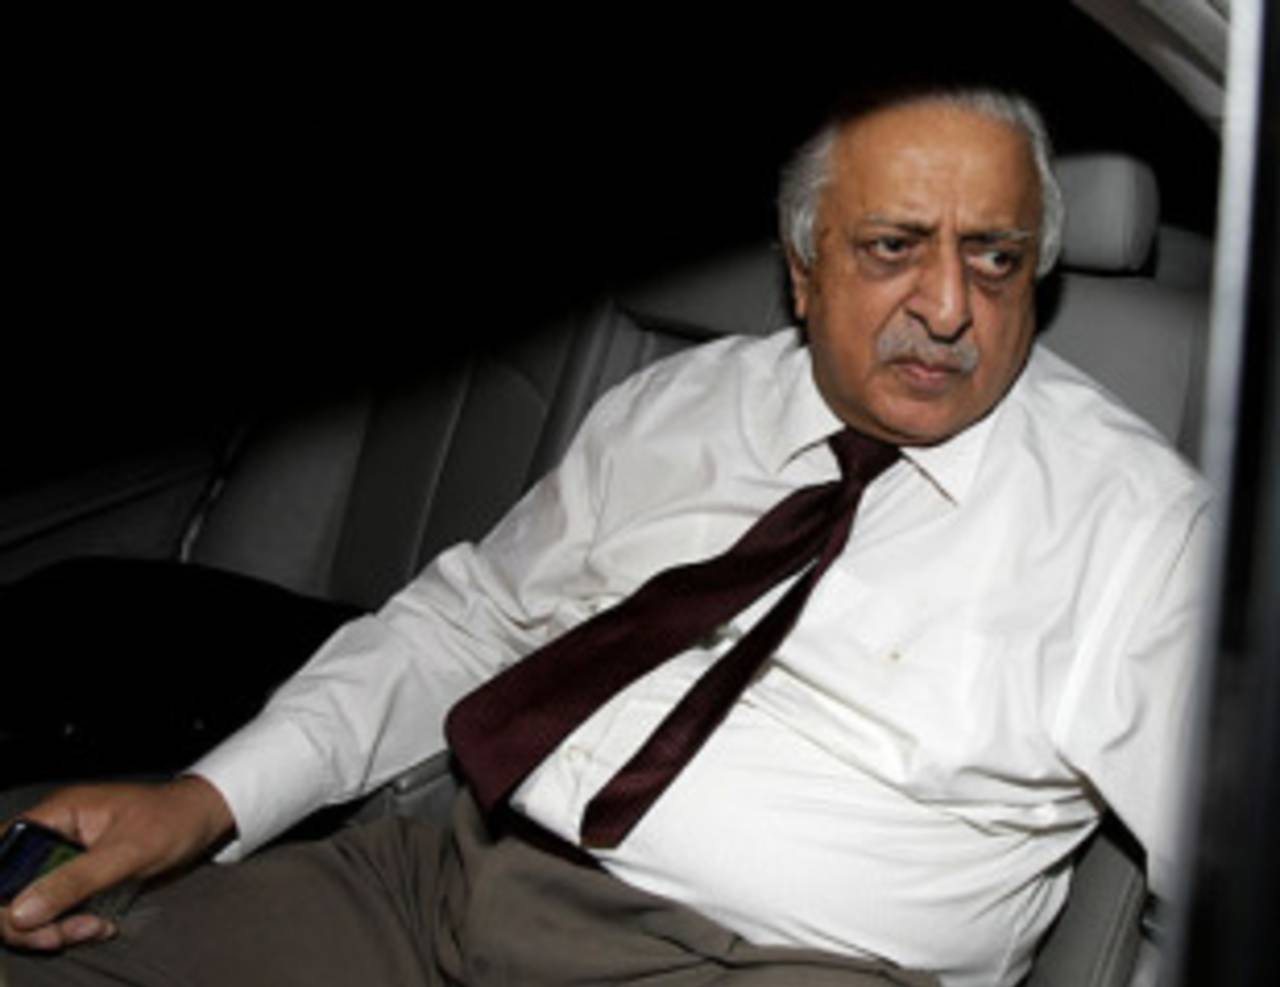 Ijaz Butt makes his way out of the PCB headquarters, Lahore, March 10, 2010